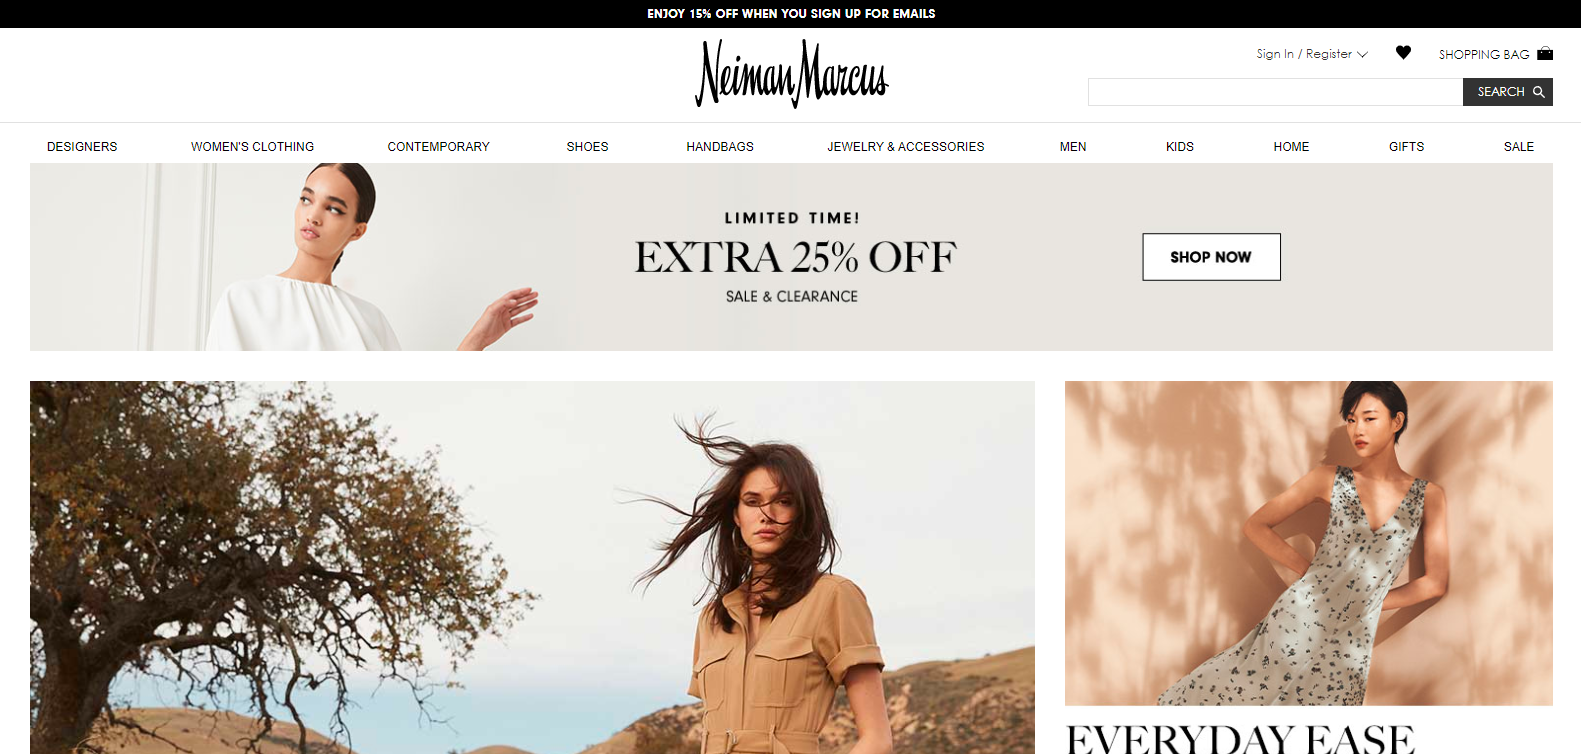 Neiman Marcus The Bankruptcy And Learning Experience For Digital Transformation Image 6